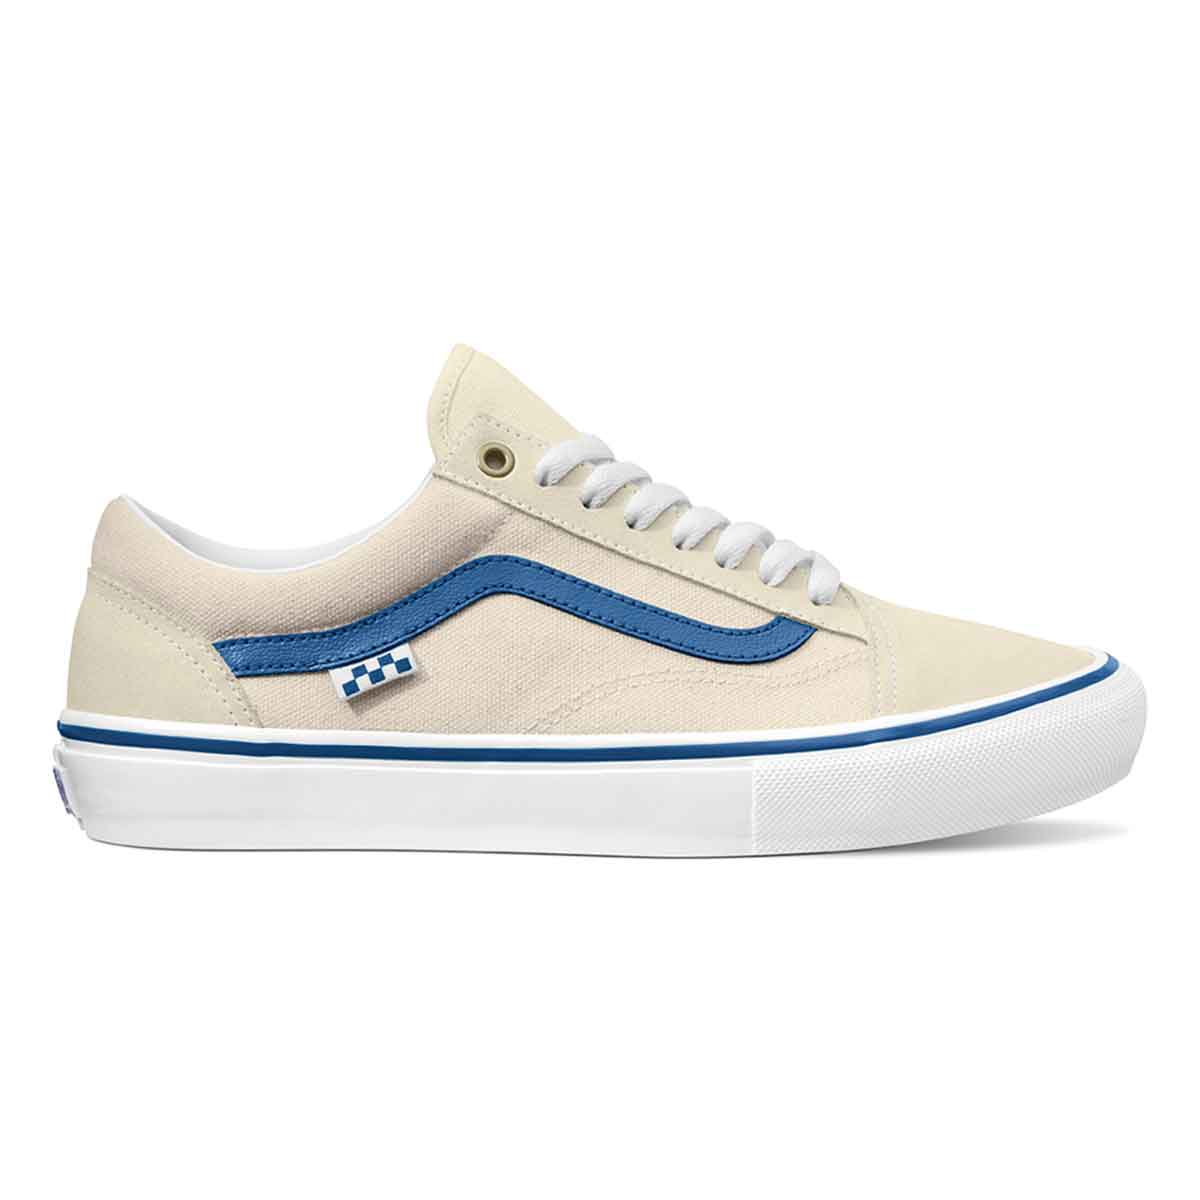 Vans Skate Old Skool Pro Shoes (Raw Classic White SoCal